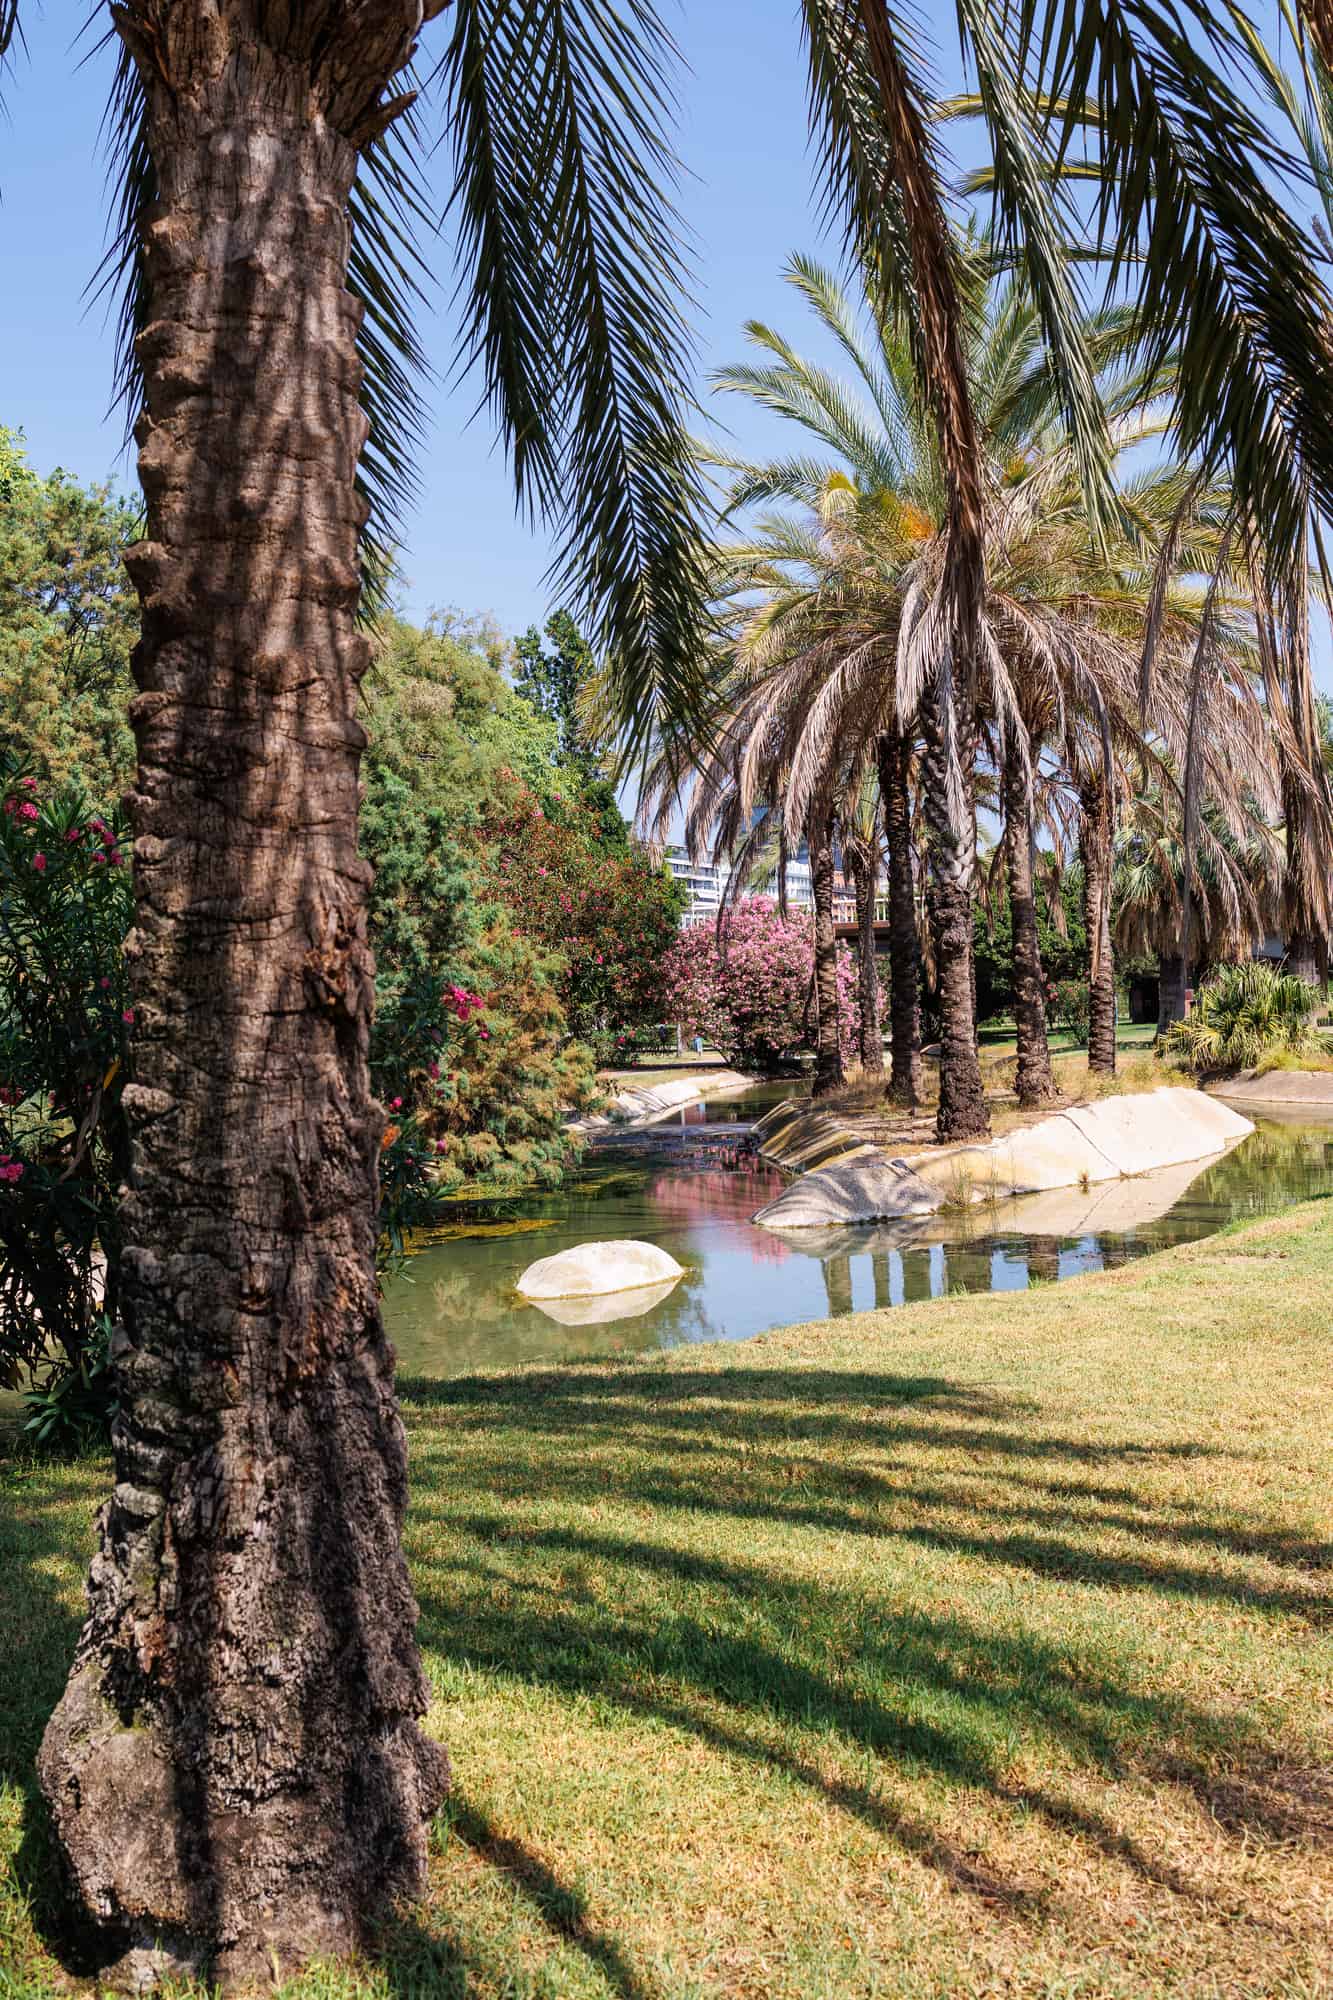 Turia Park with Palm Trees and Flowers in March, Valencia